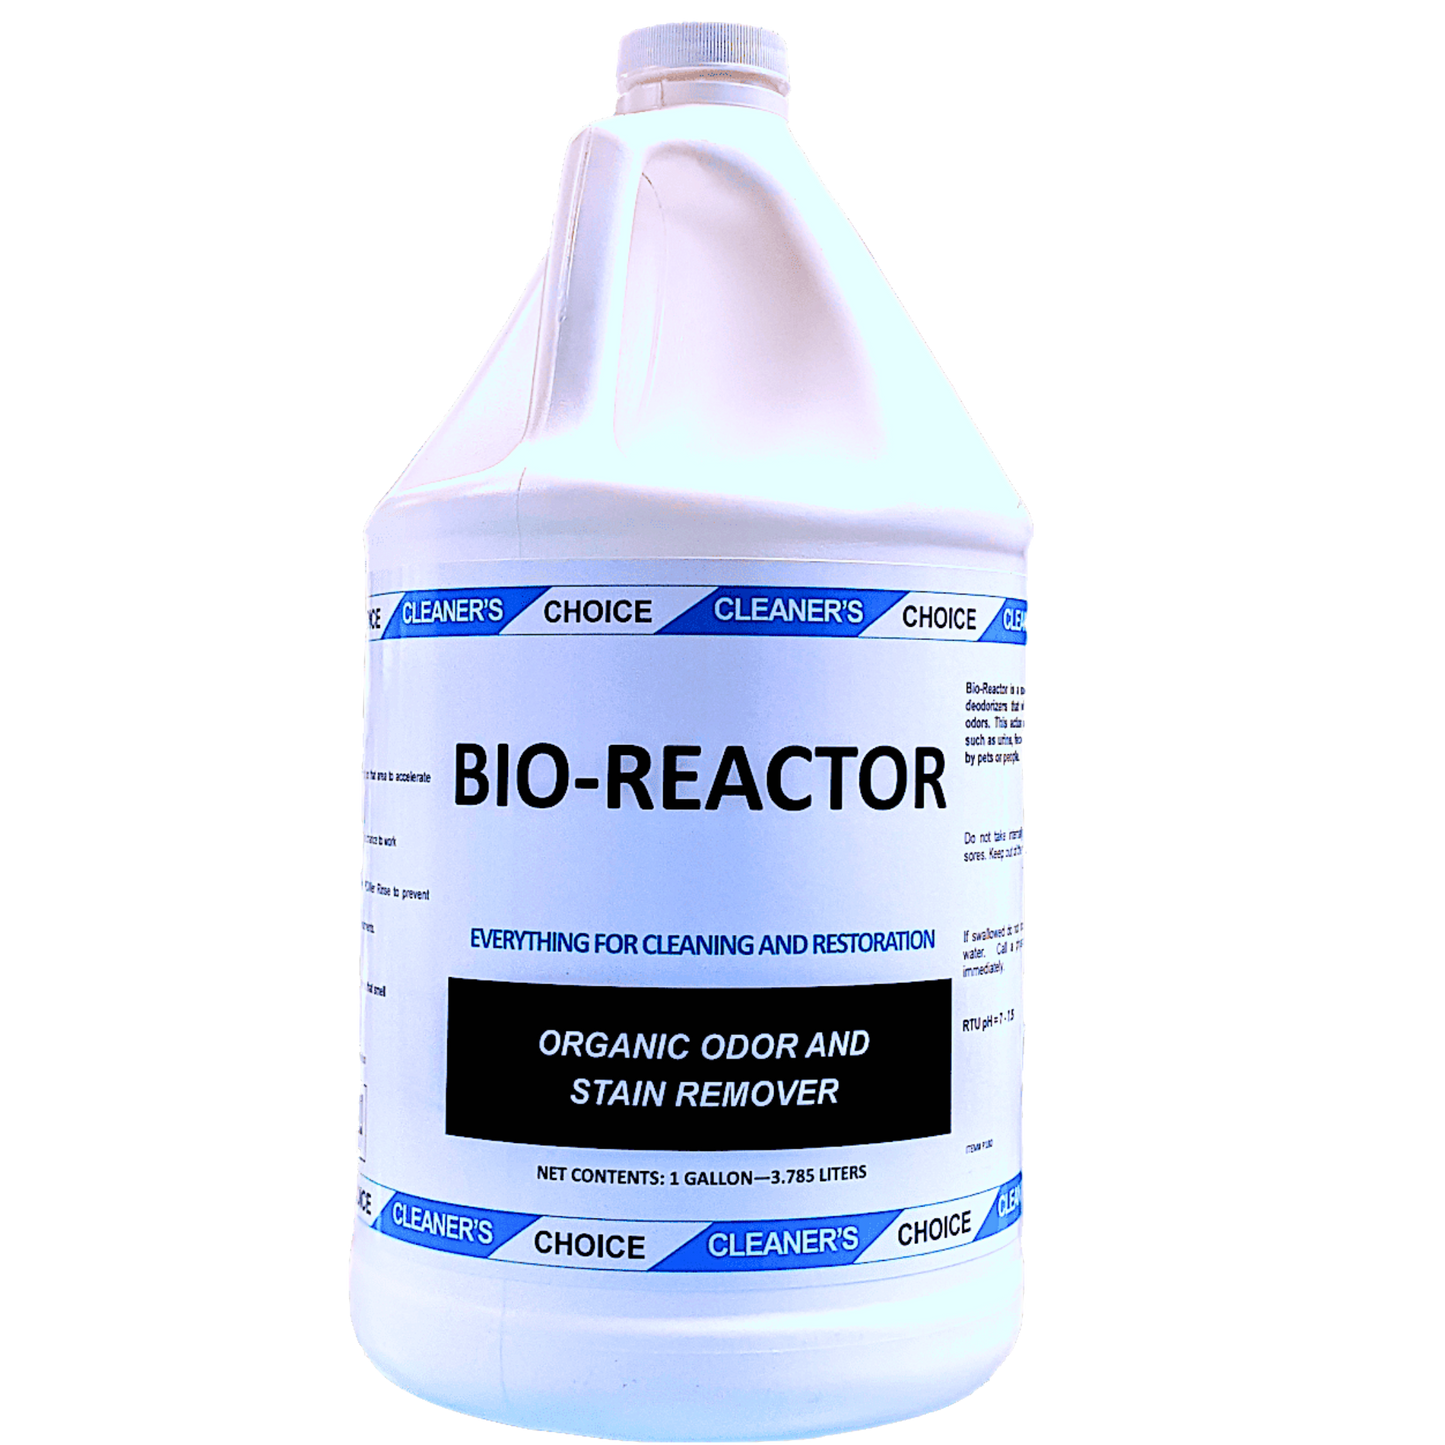 BIO-REACTOR, Organic Odor and Stain Remover (1 gal) Misc